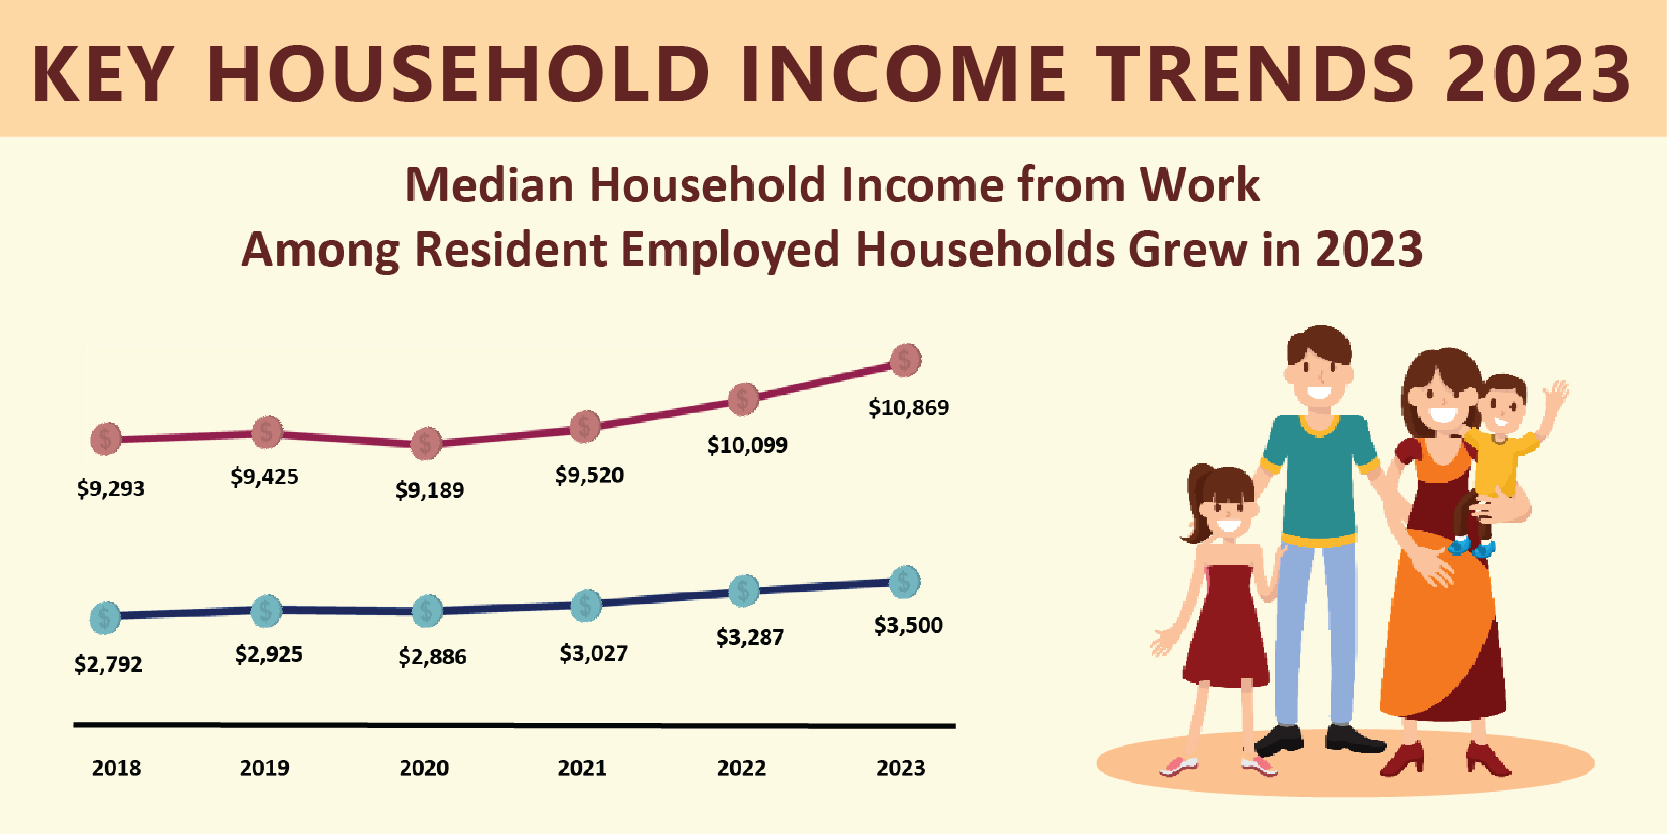 Key Household Income Trends, 2023